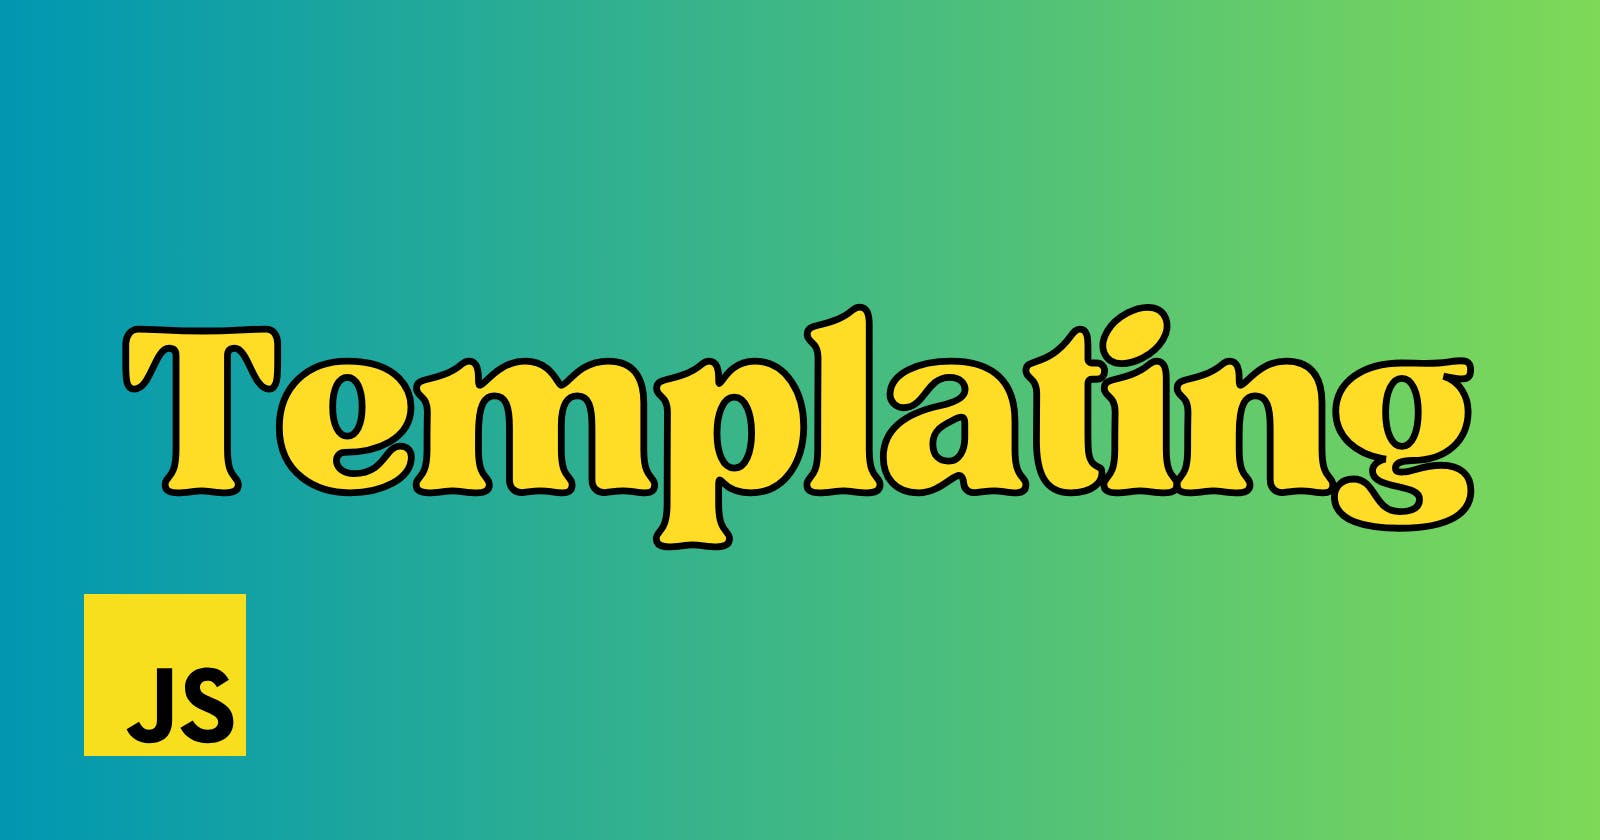 What Is Templating and how to use it in JavaScript?